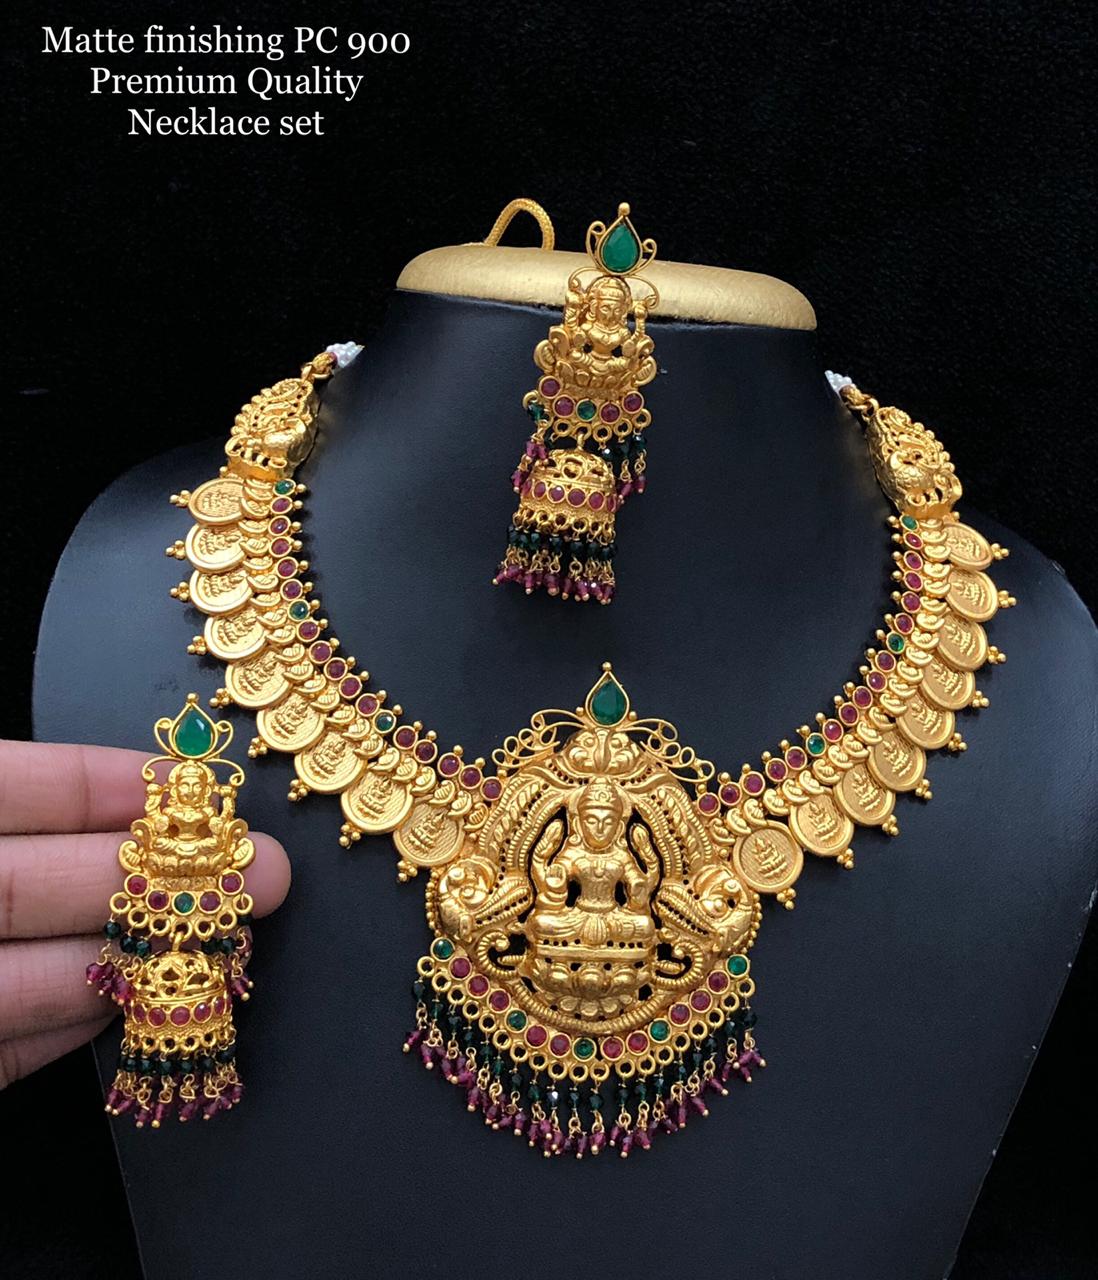 Premium Quality Gold Jewellery Collection - Indian Jewelry Designs